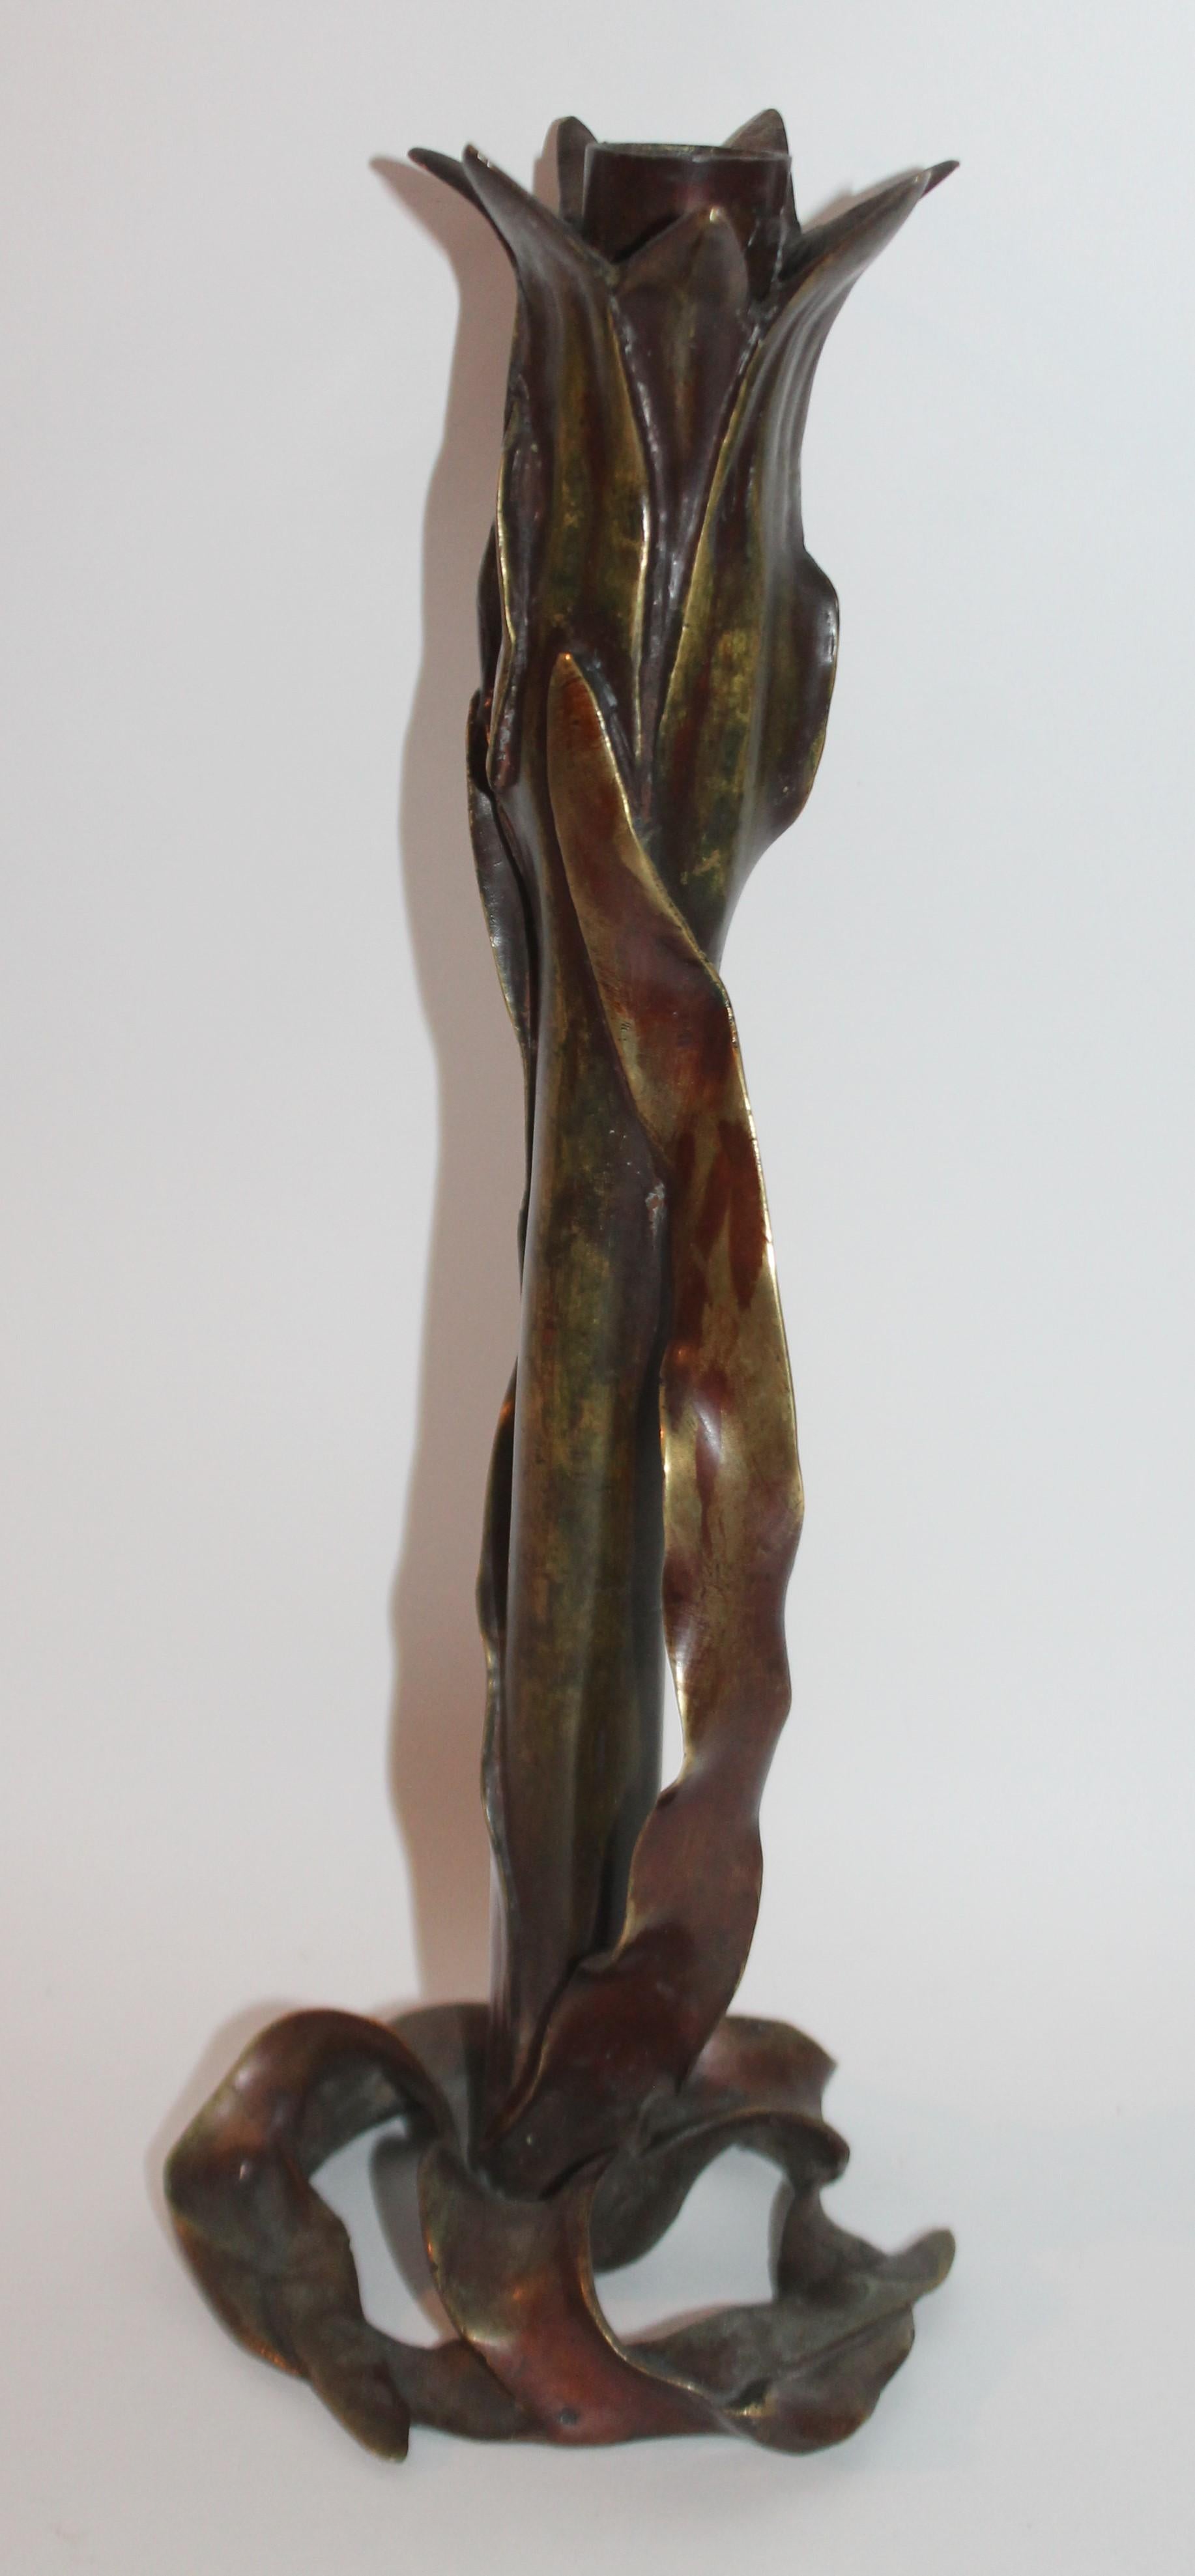 This handcrafted bronze candlestick holder is depicting a corn stalk. It is unsigned with an amazing patina.